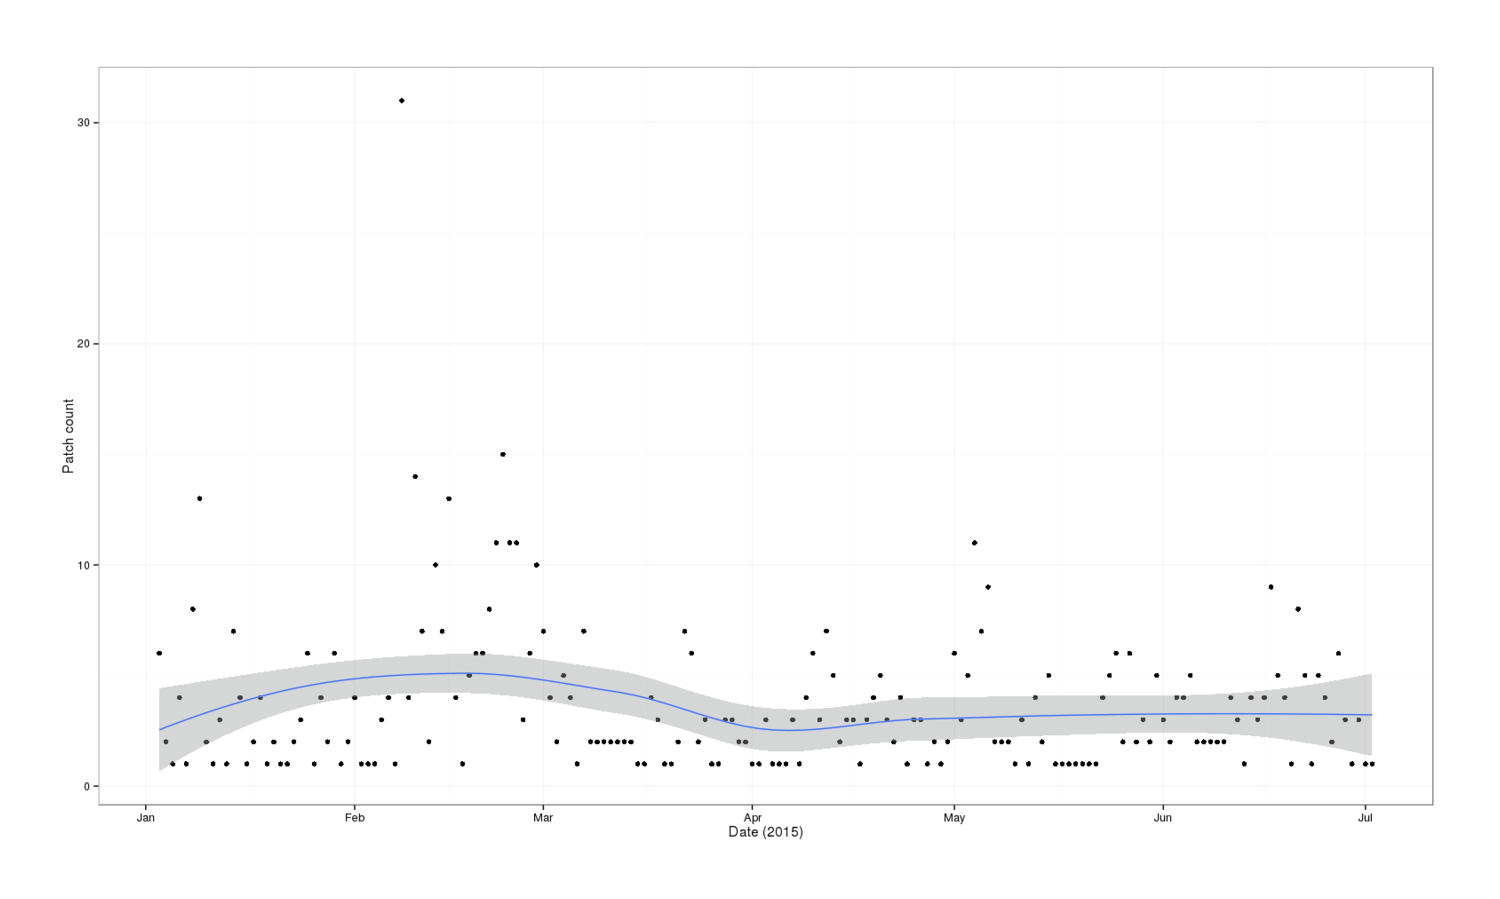 Plot of patch creations (y-axis) versus date (x-axis): January 2015 to July 2015